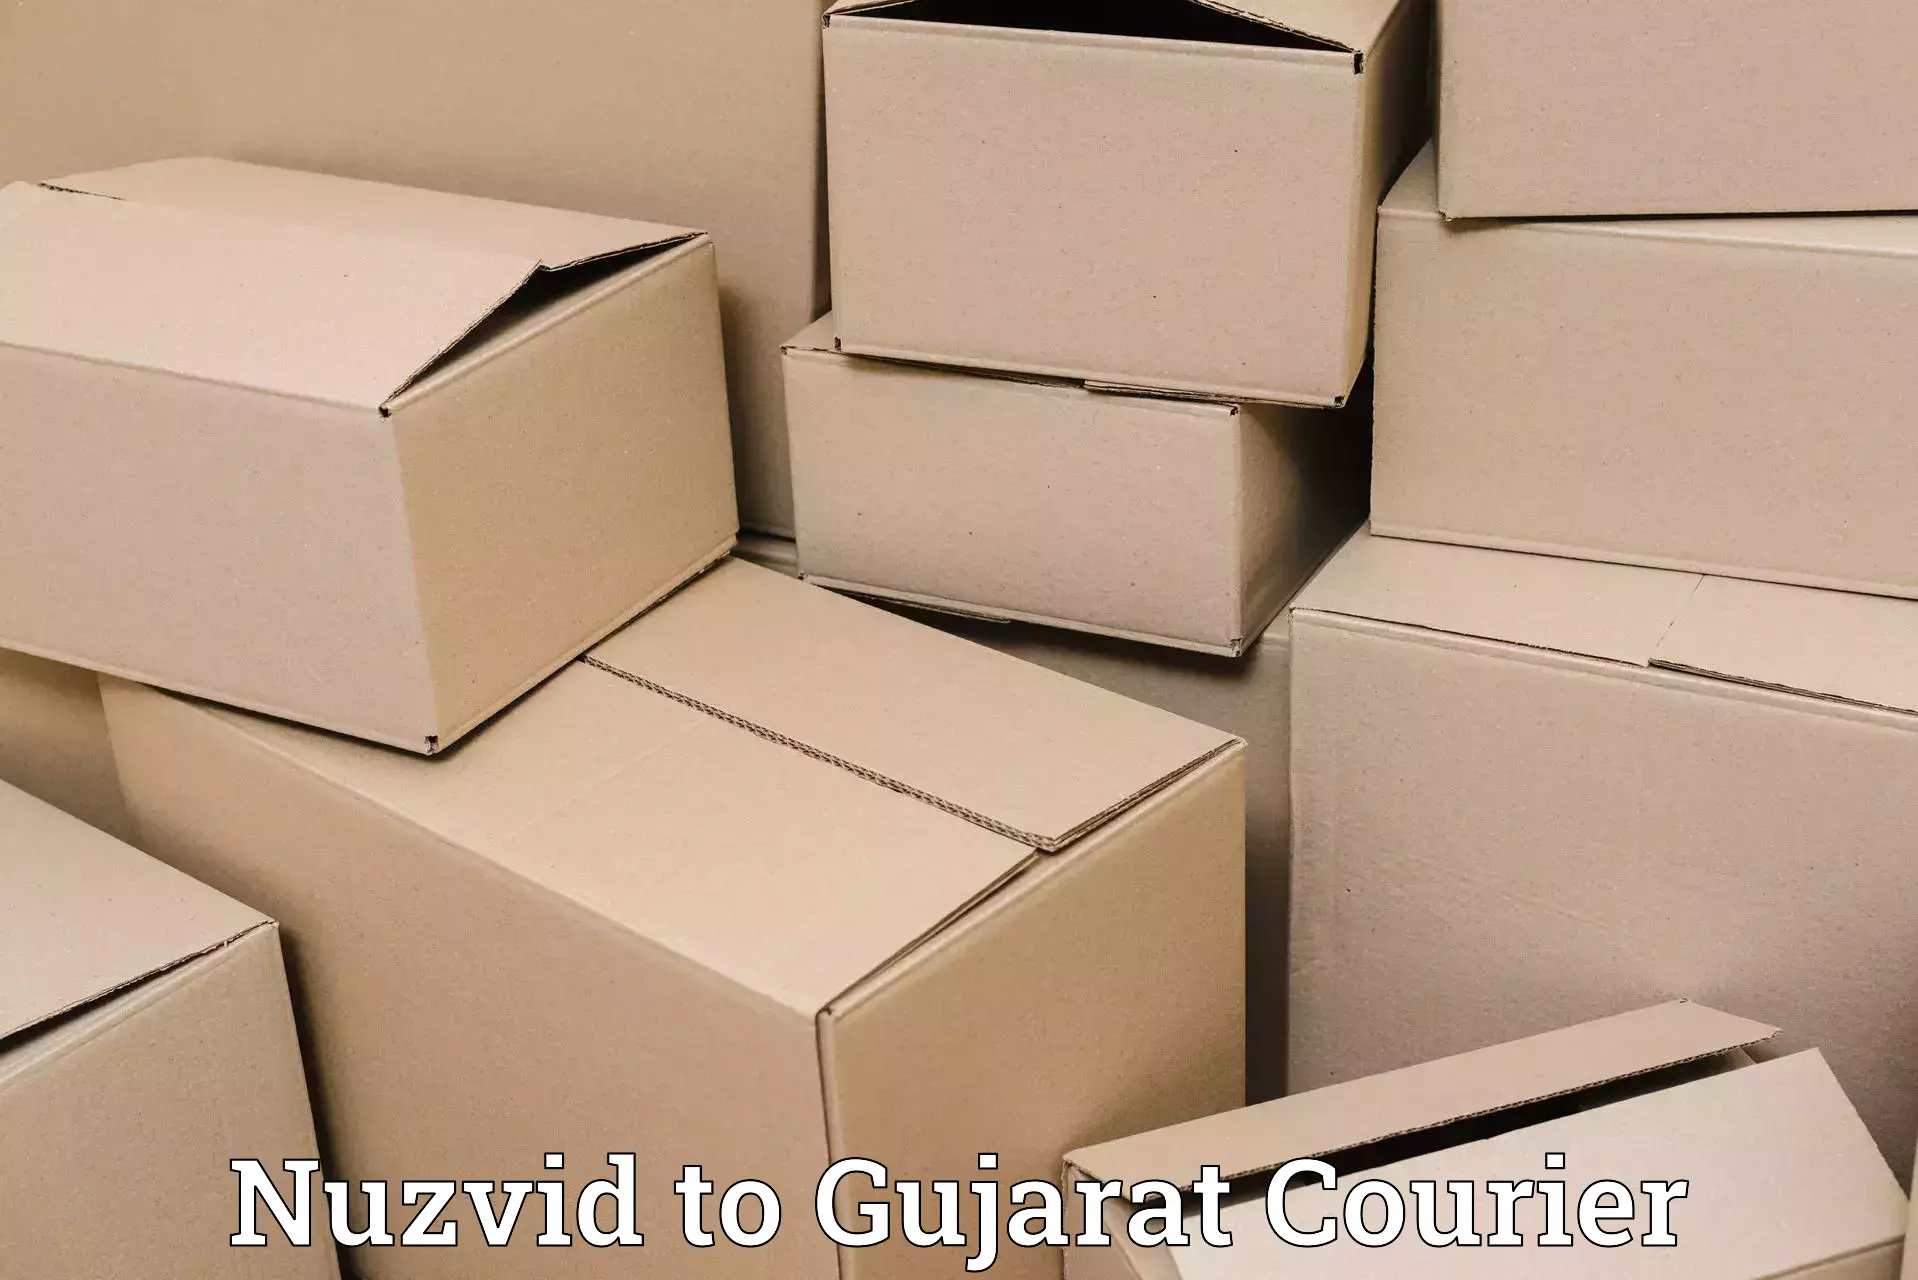 End-to-end delivery Nuzvid to Gandhinagar